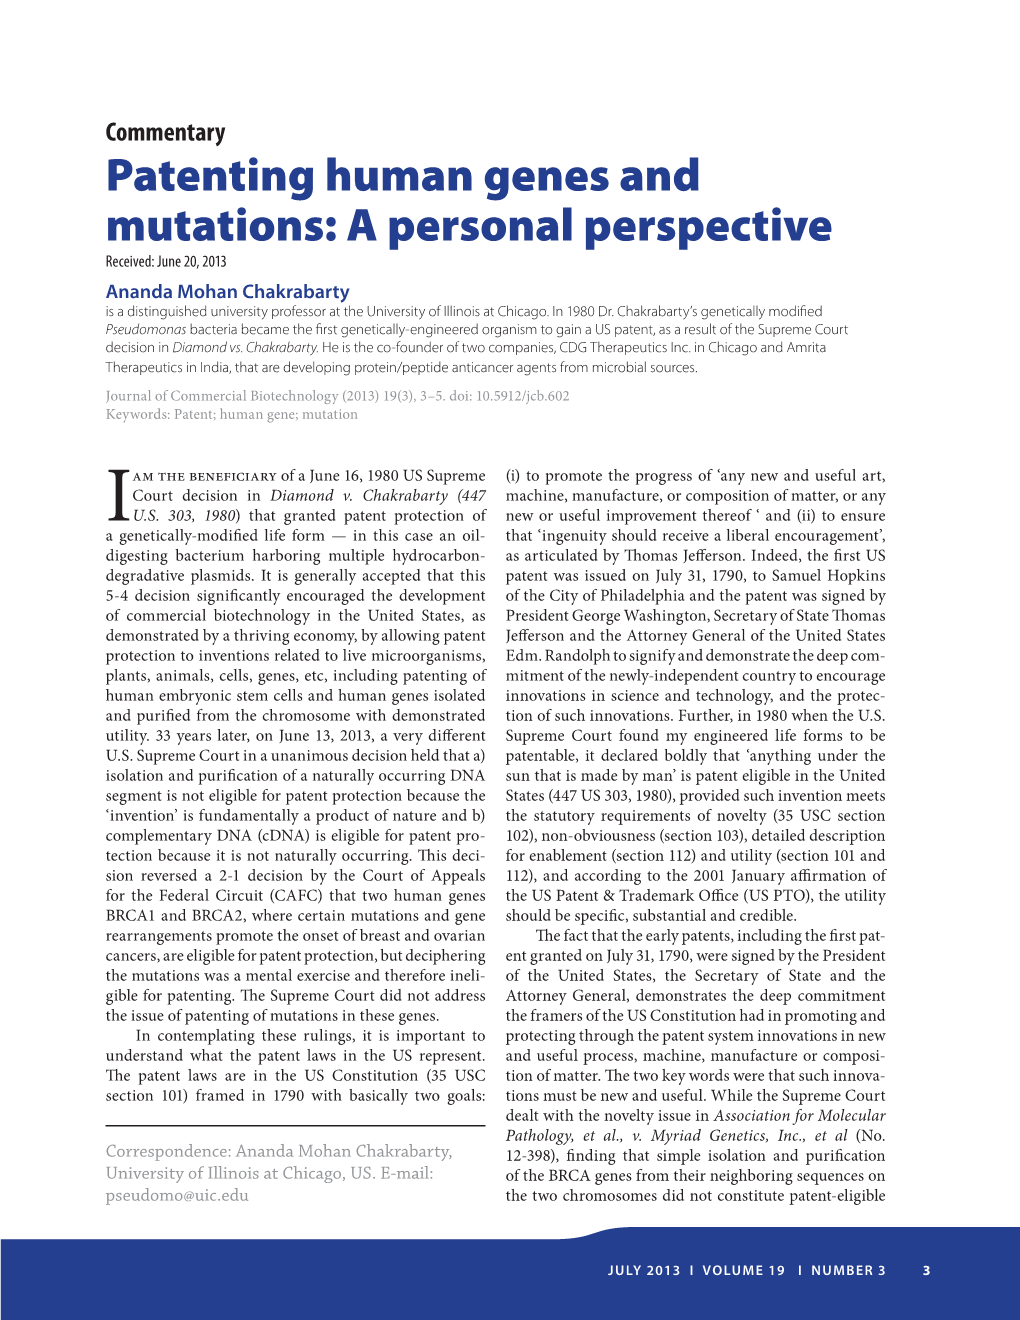 Patenting Human Genes and Mutations